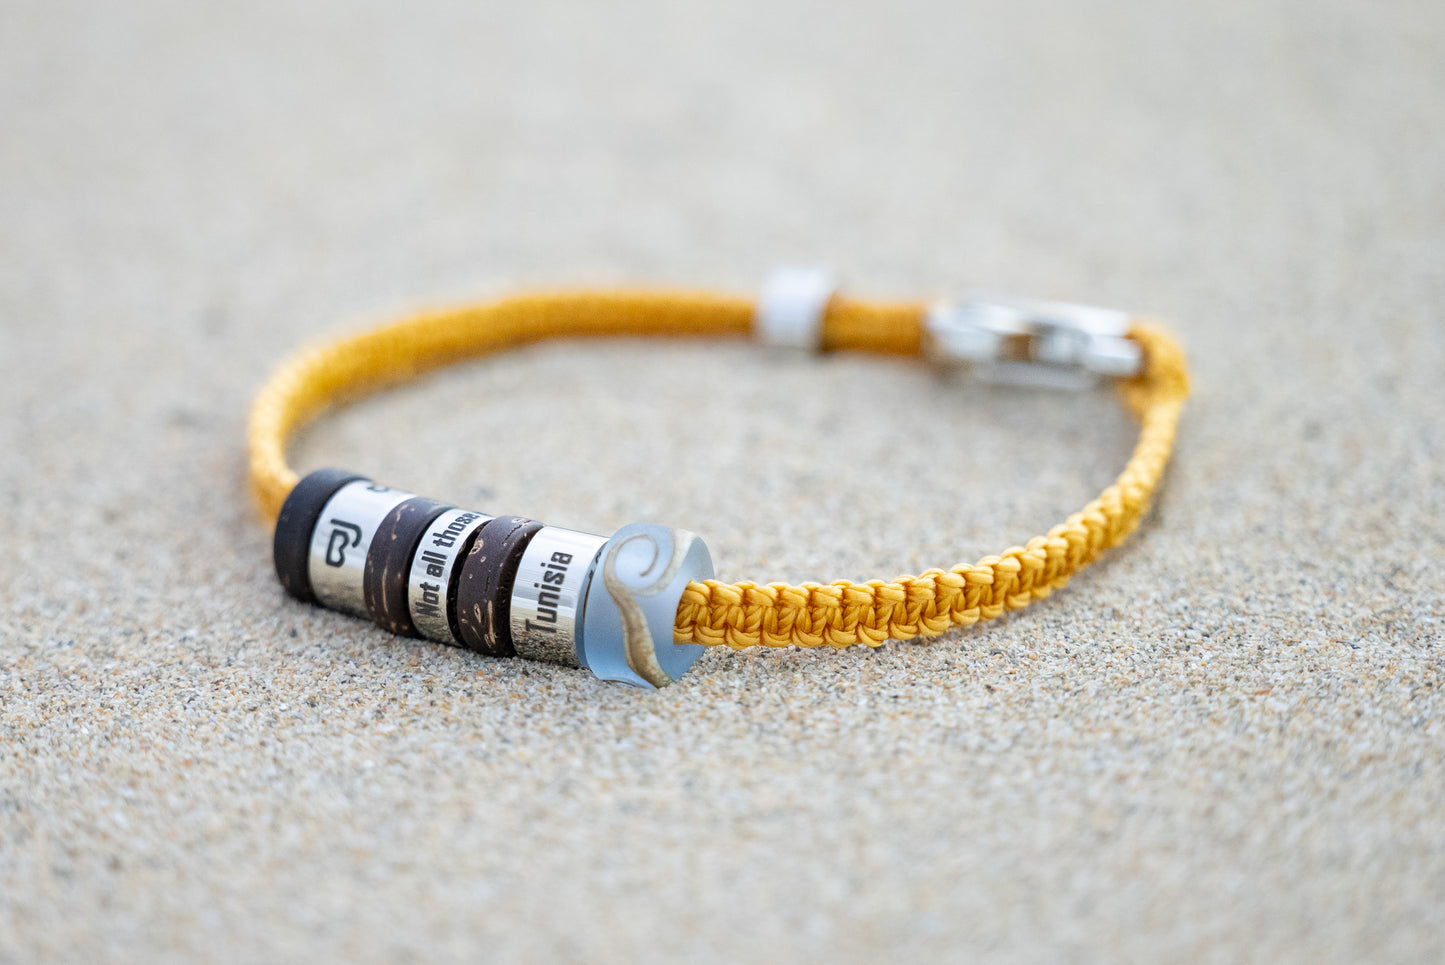 El Camino Travel Souvenir Memory Bracelet - Snorkel, Not all those who wander are lost, Tunisia, Arctic Ocean Steps Charms